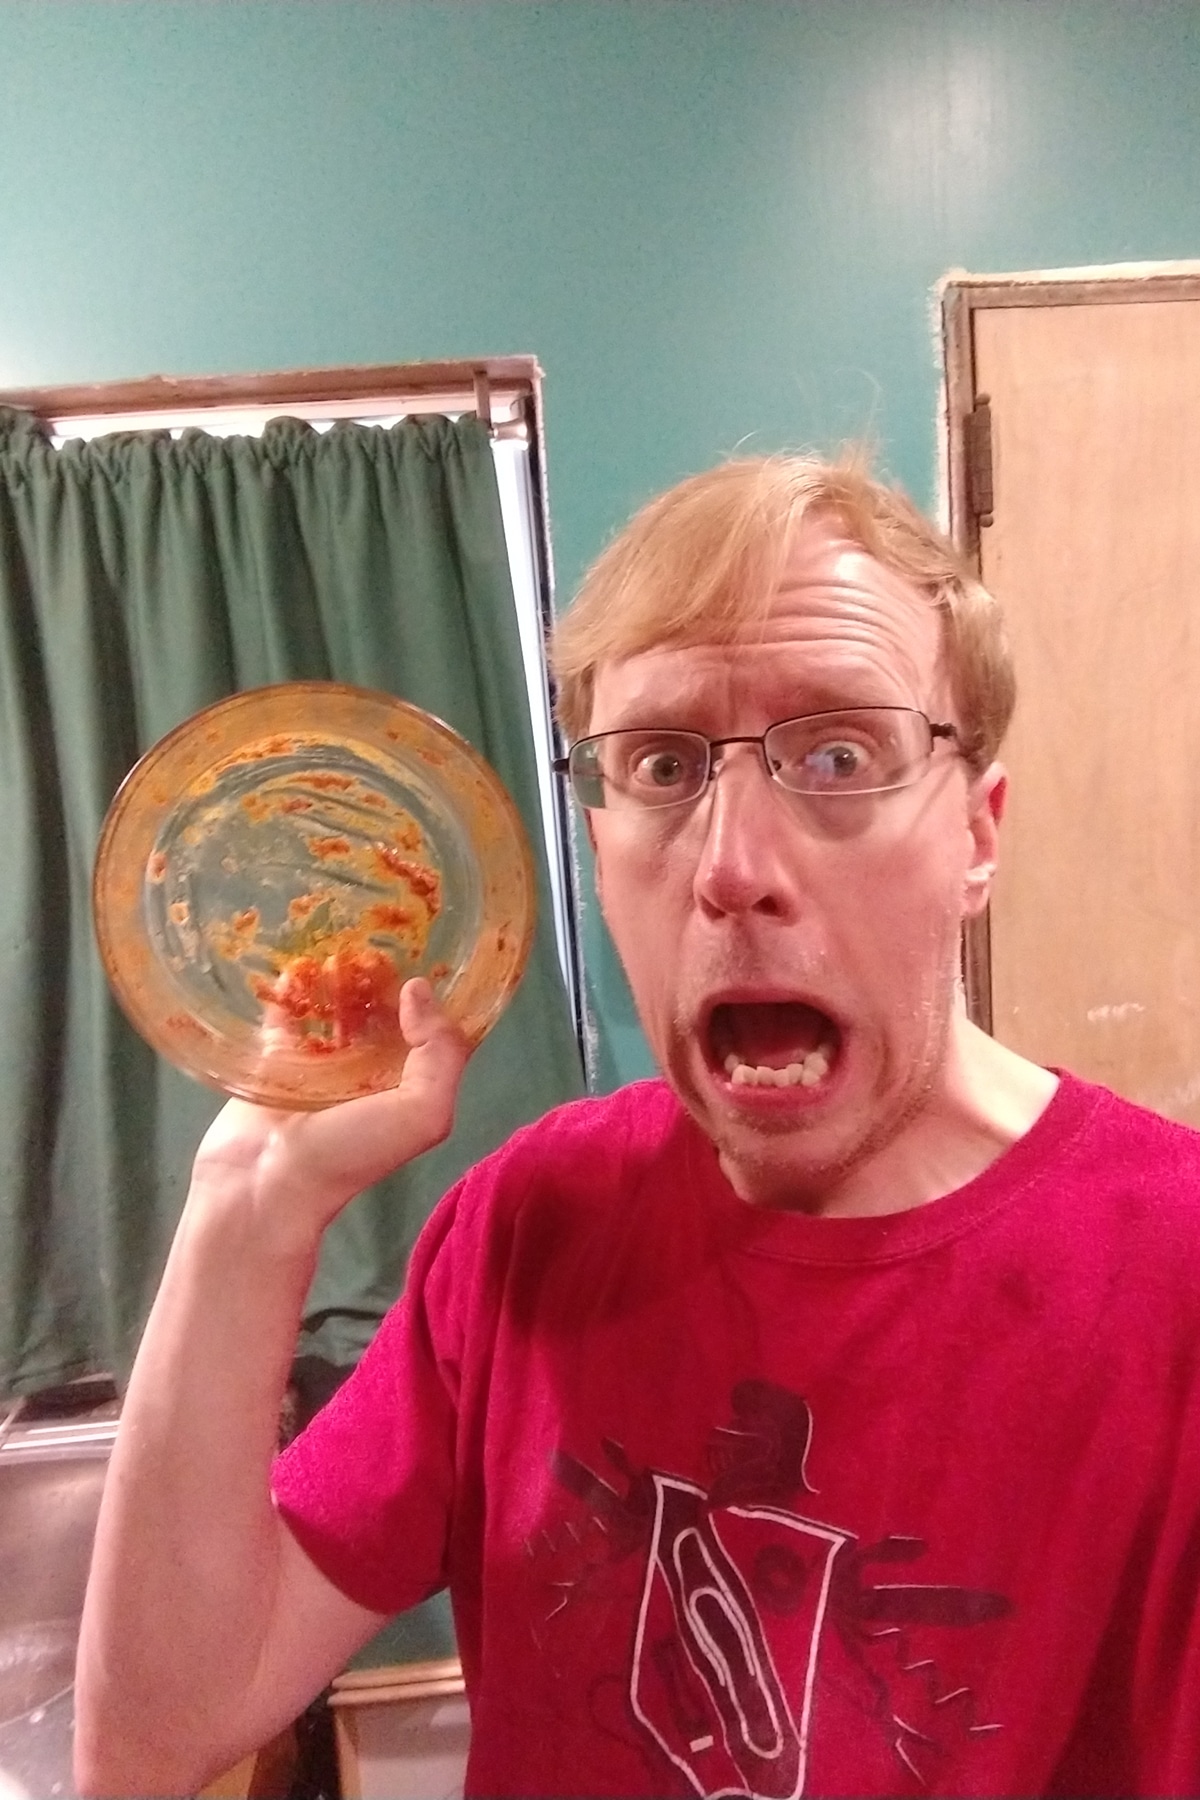 A blonde man holds up an empty bowl, with a horrified look on his face.